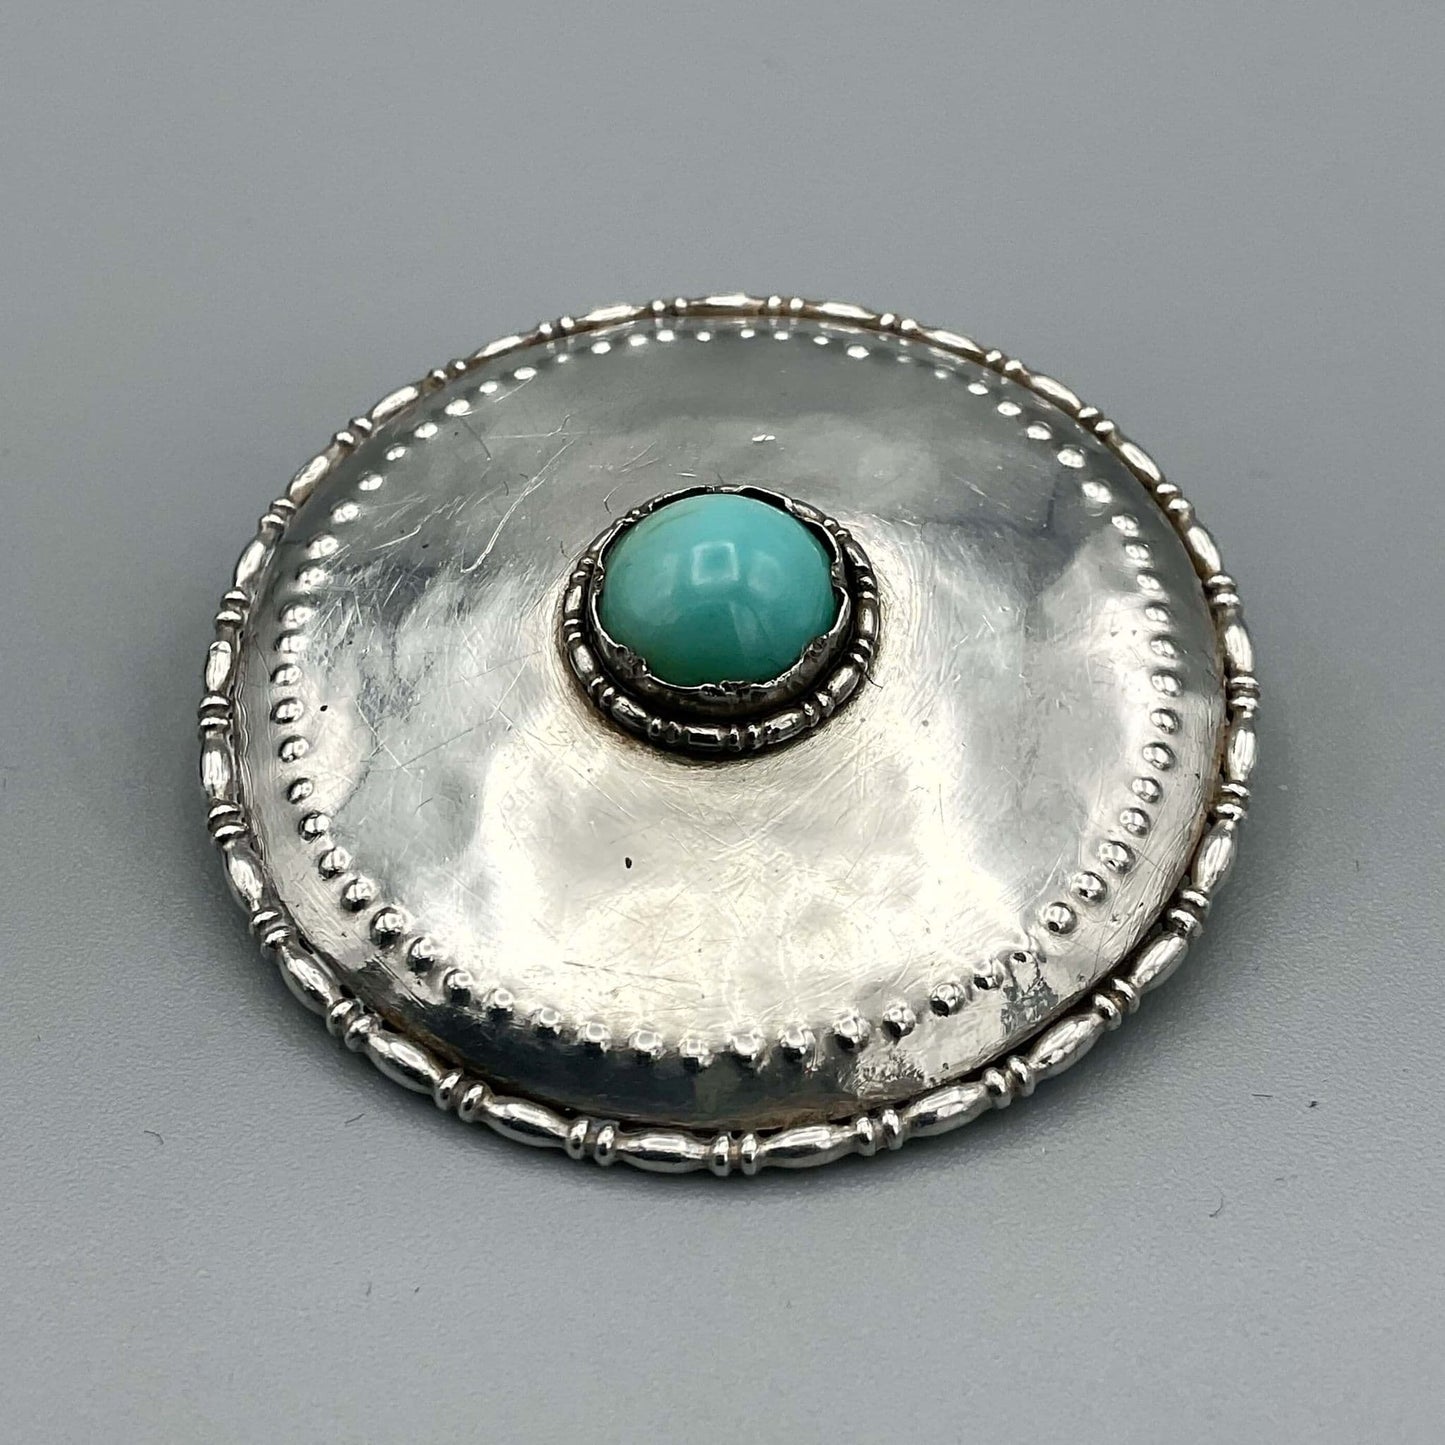 Antique Turquoise Shield Brooch